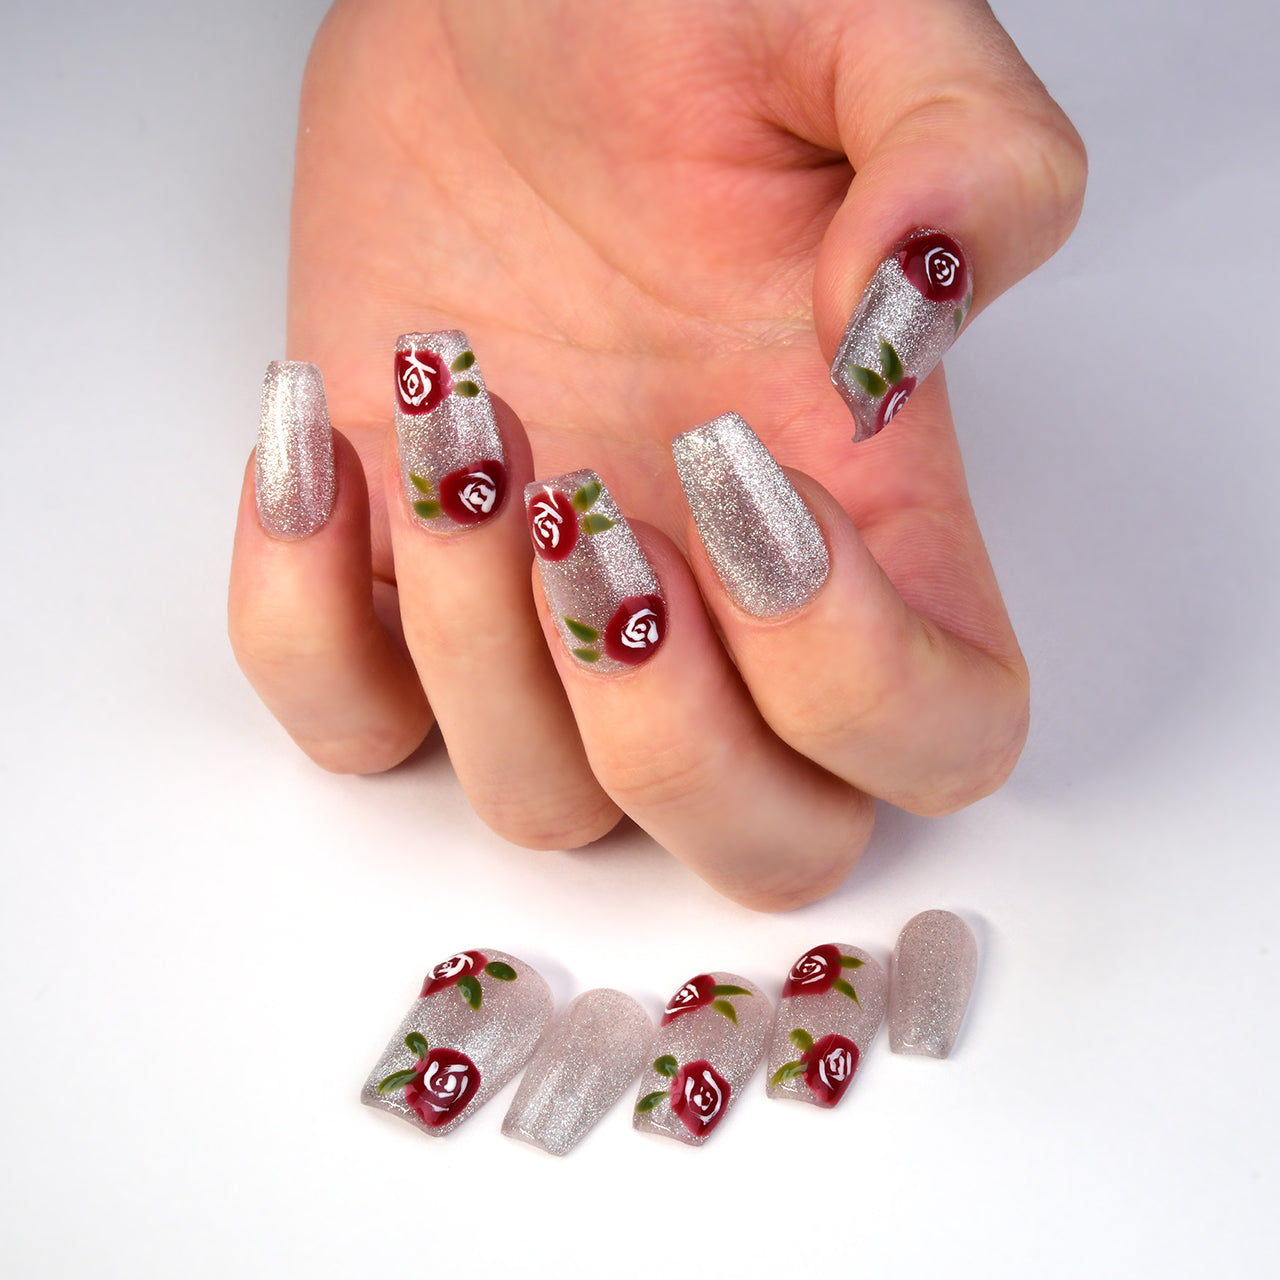 Exquisite Silver Medium Coffin Handmade Press On Nails With Red Rose Design-BEYONDCANVA